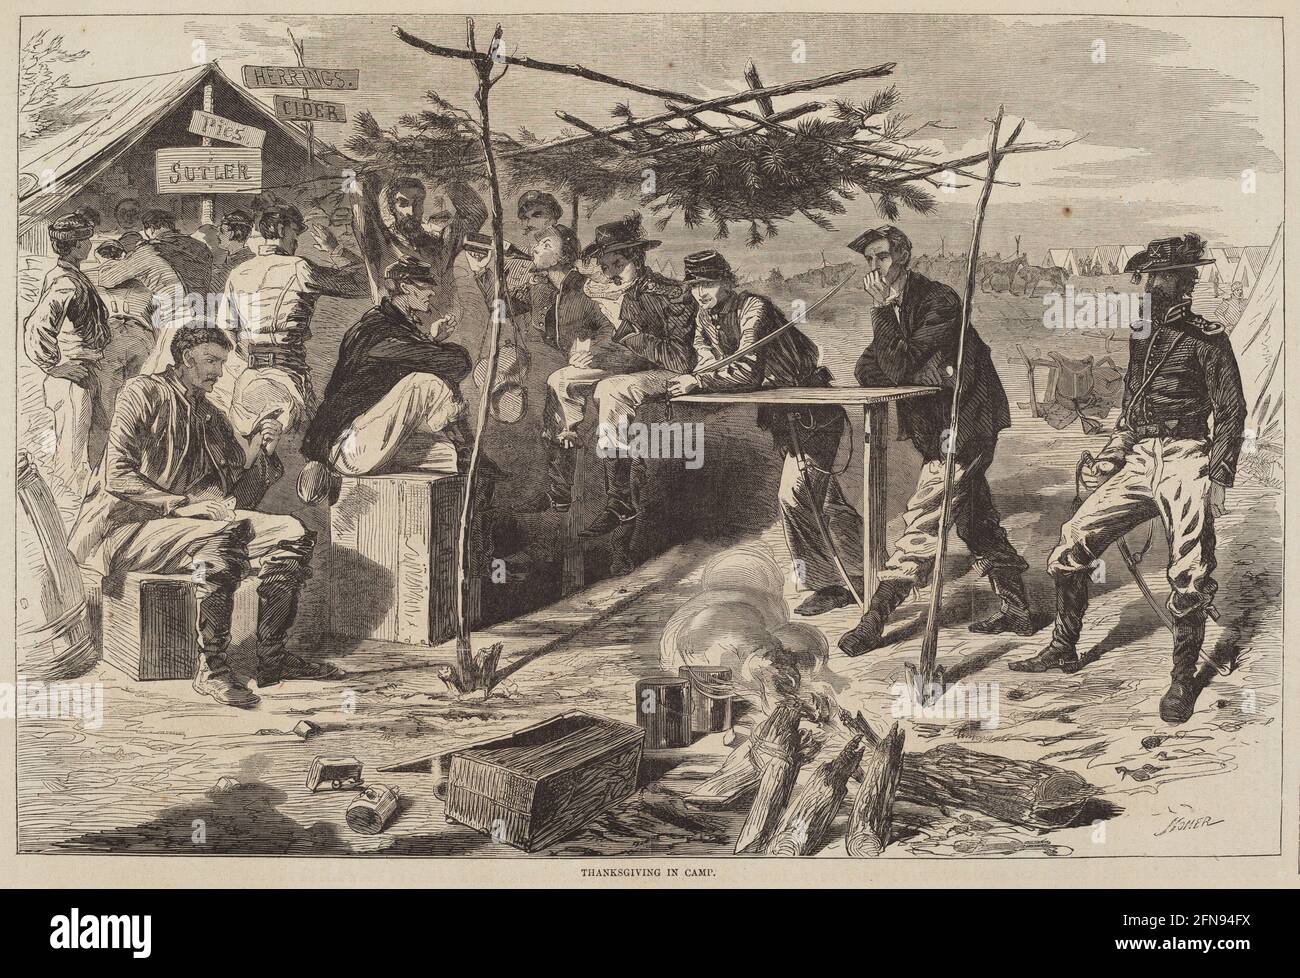 Thanksgiving in Camp, published 1862. Stock Photo